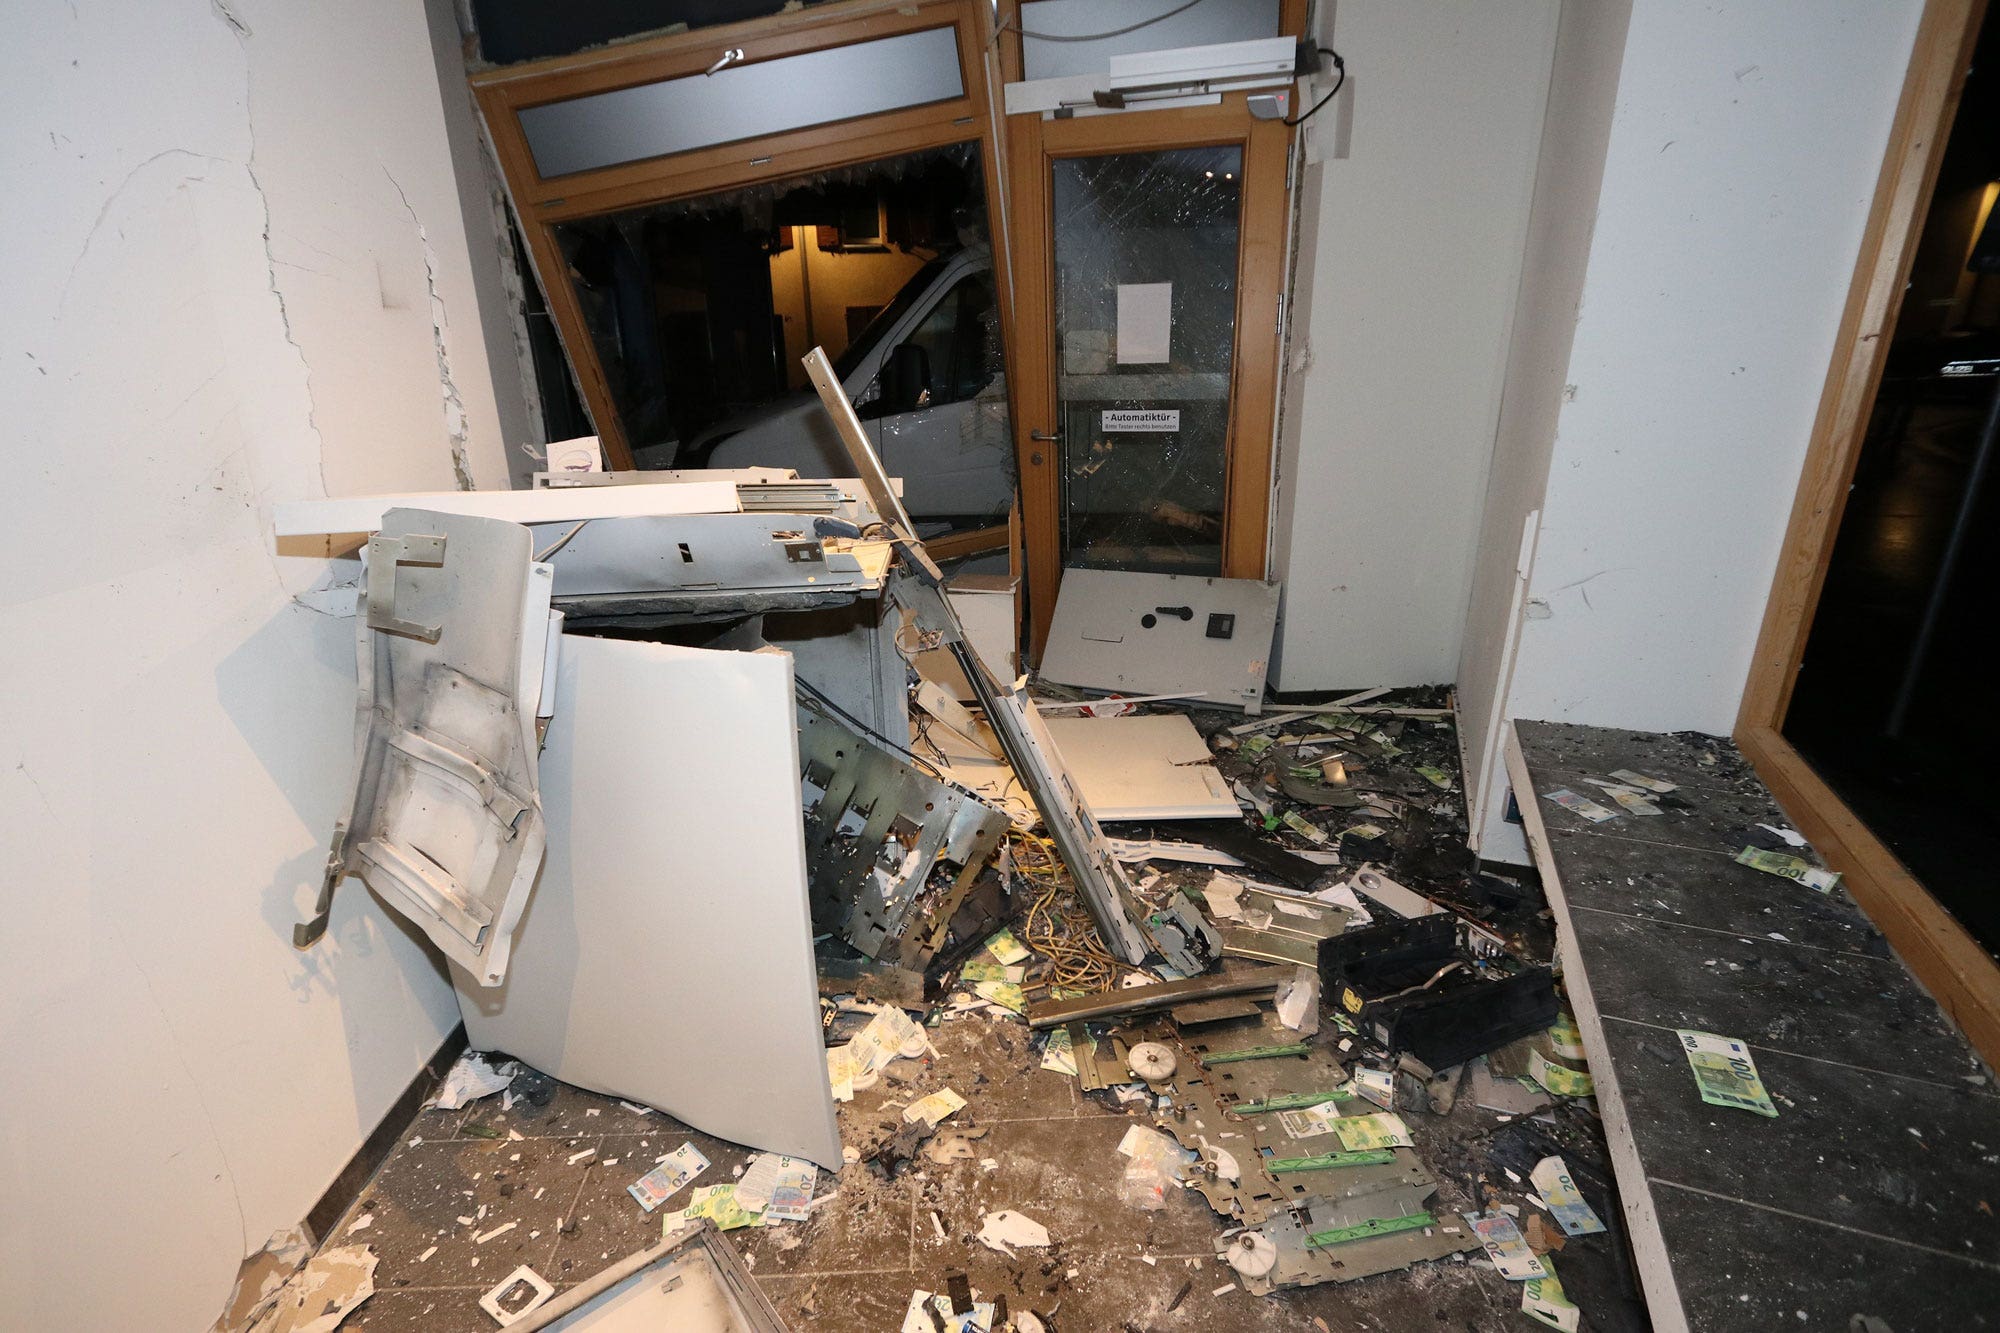 In Europe ‘a new generation of bank robbers’ target ATMs with explosives, stealing millions